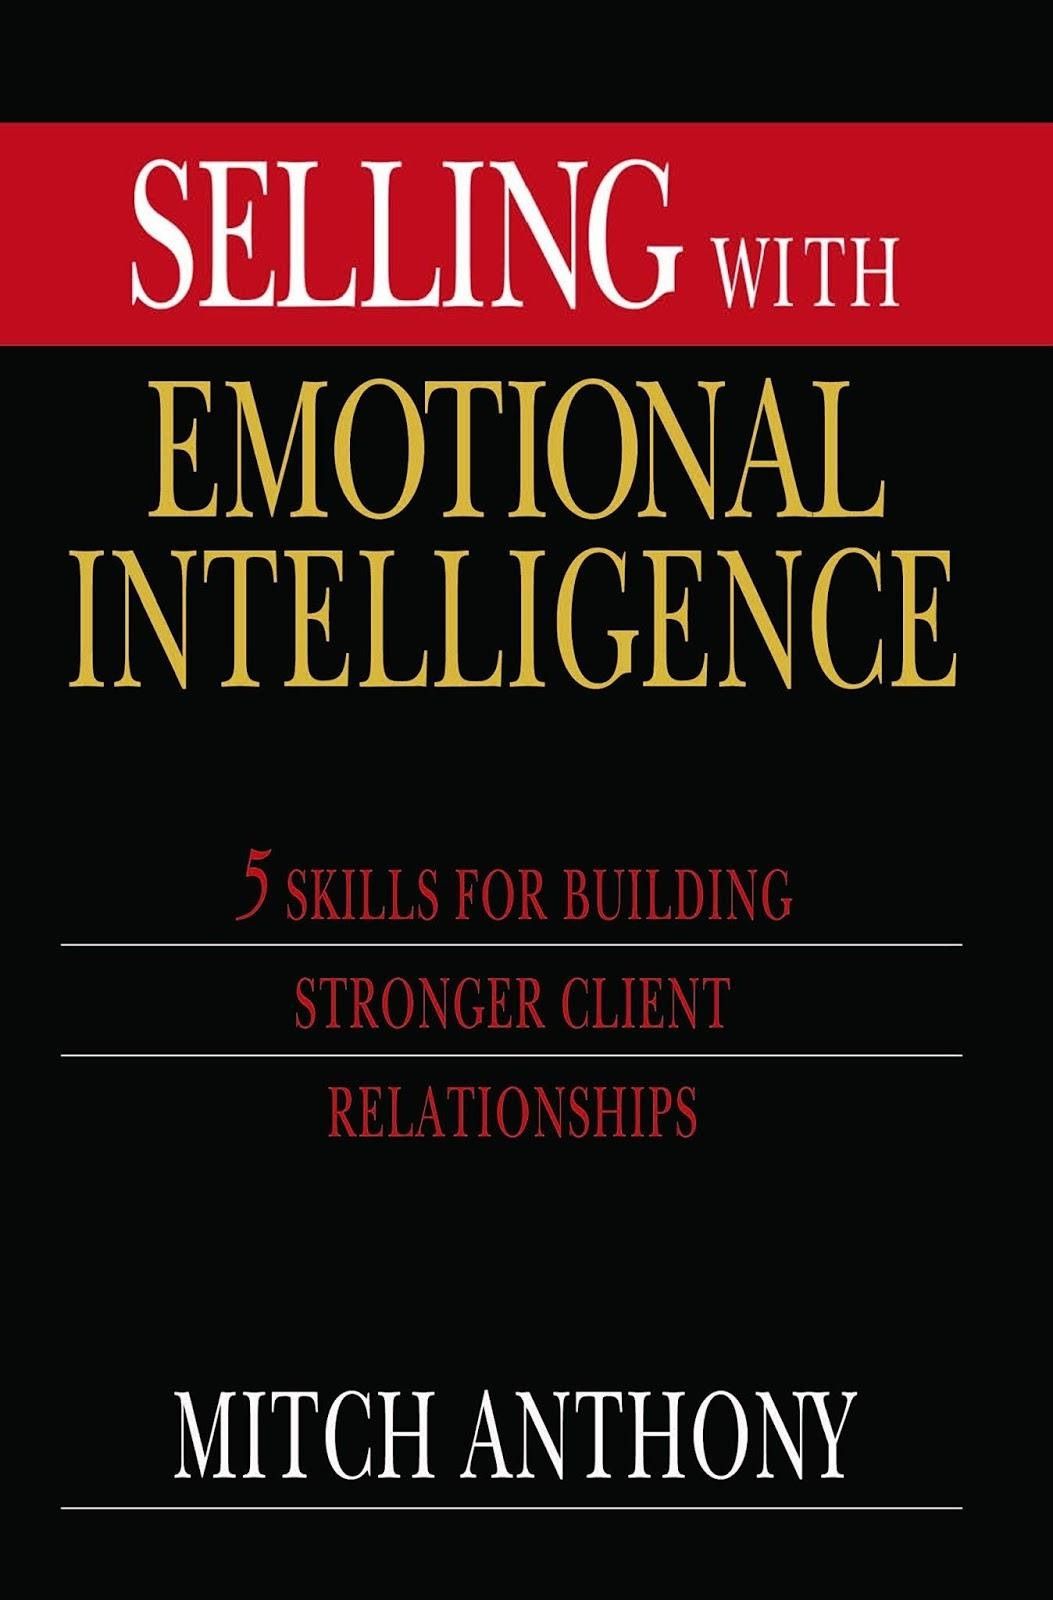 Livro 'Selling with Emotional Intelligence'